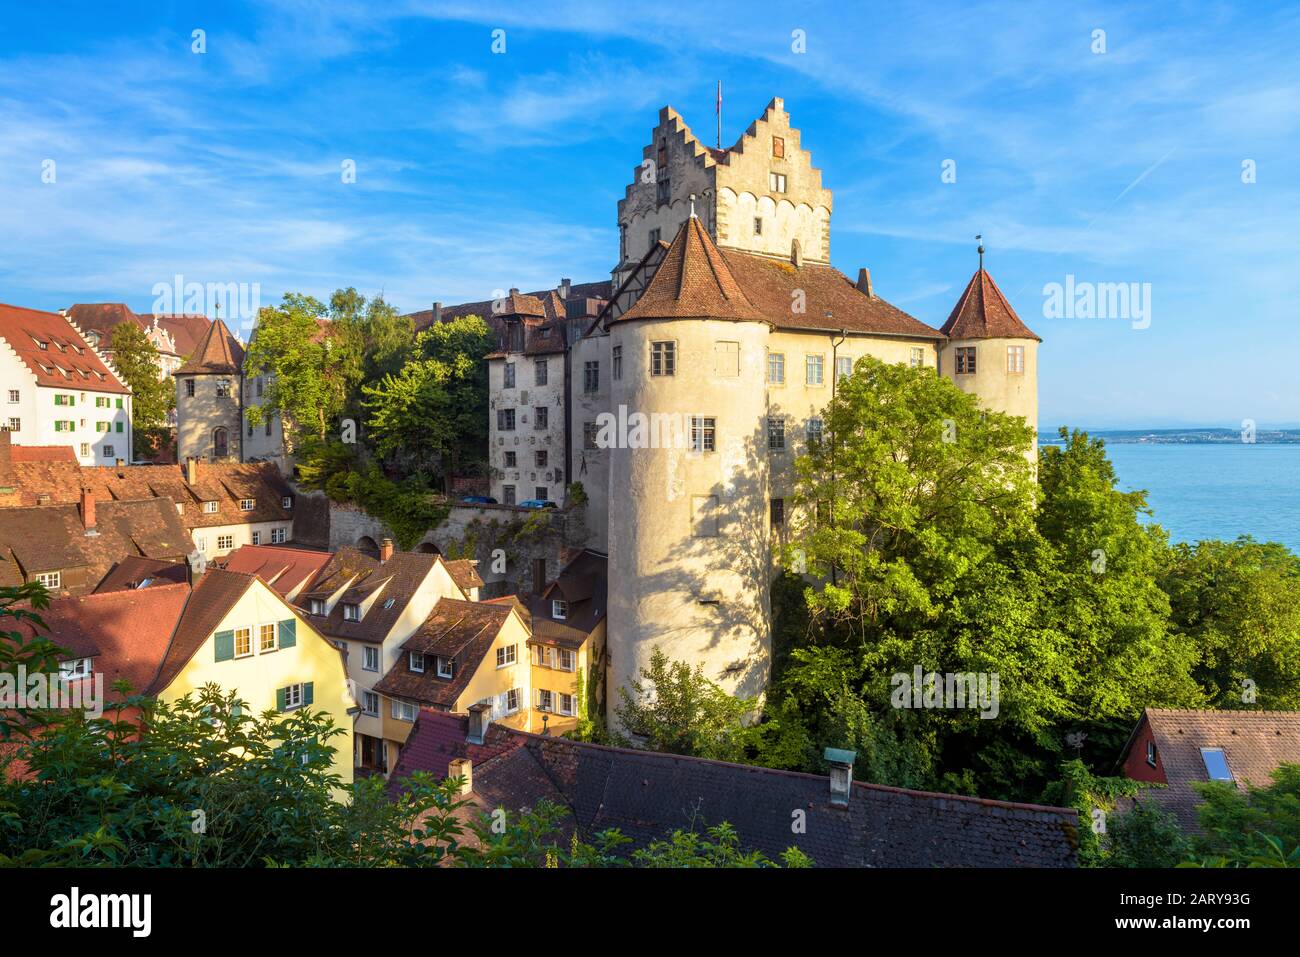 Meersburg Castle at Lake Constance or Bodensee, Germany. This medieval castle is landmark of Meersburg town. Scenic view of old German castle in summe Stock Photo